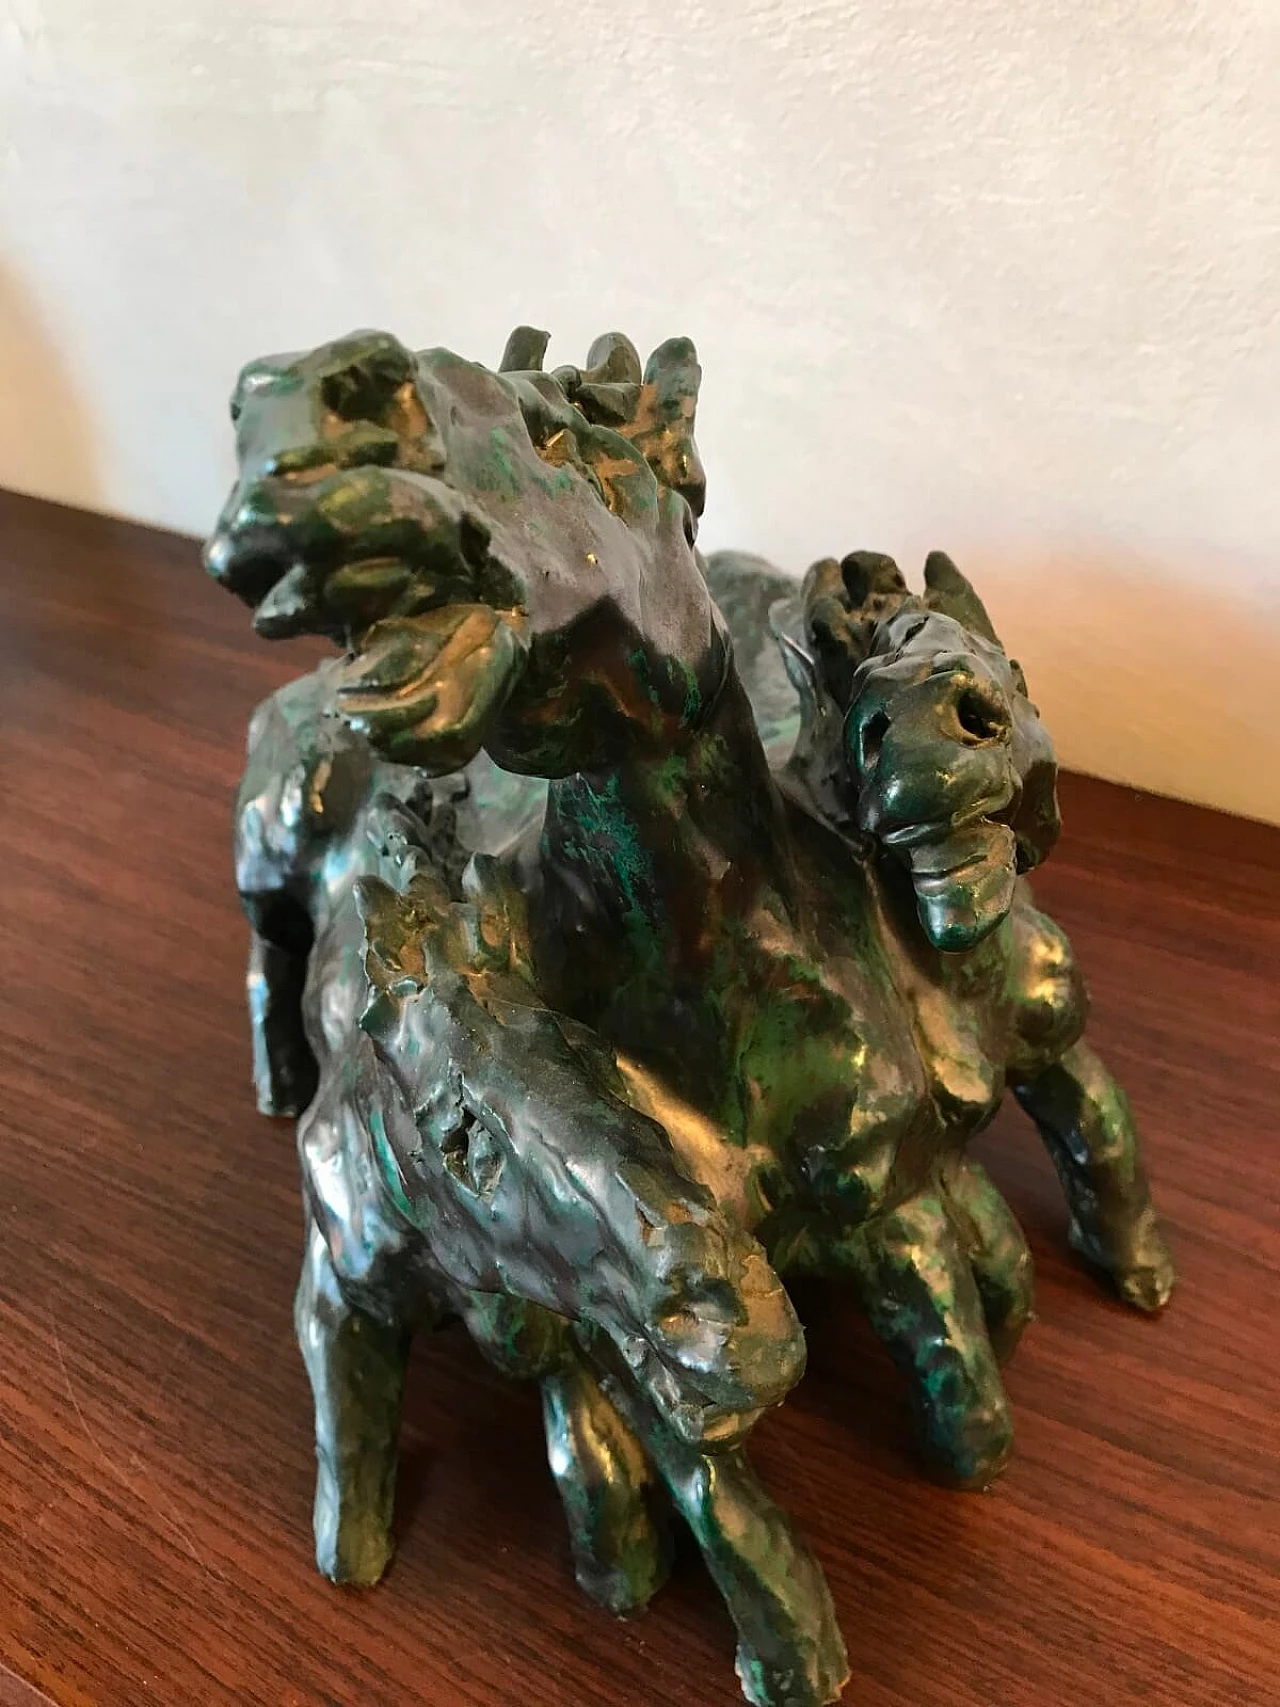 Sculpture by Umberto Ghersi with three ceramic horses 5